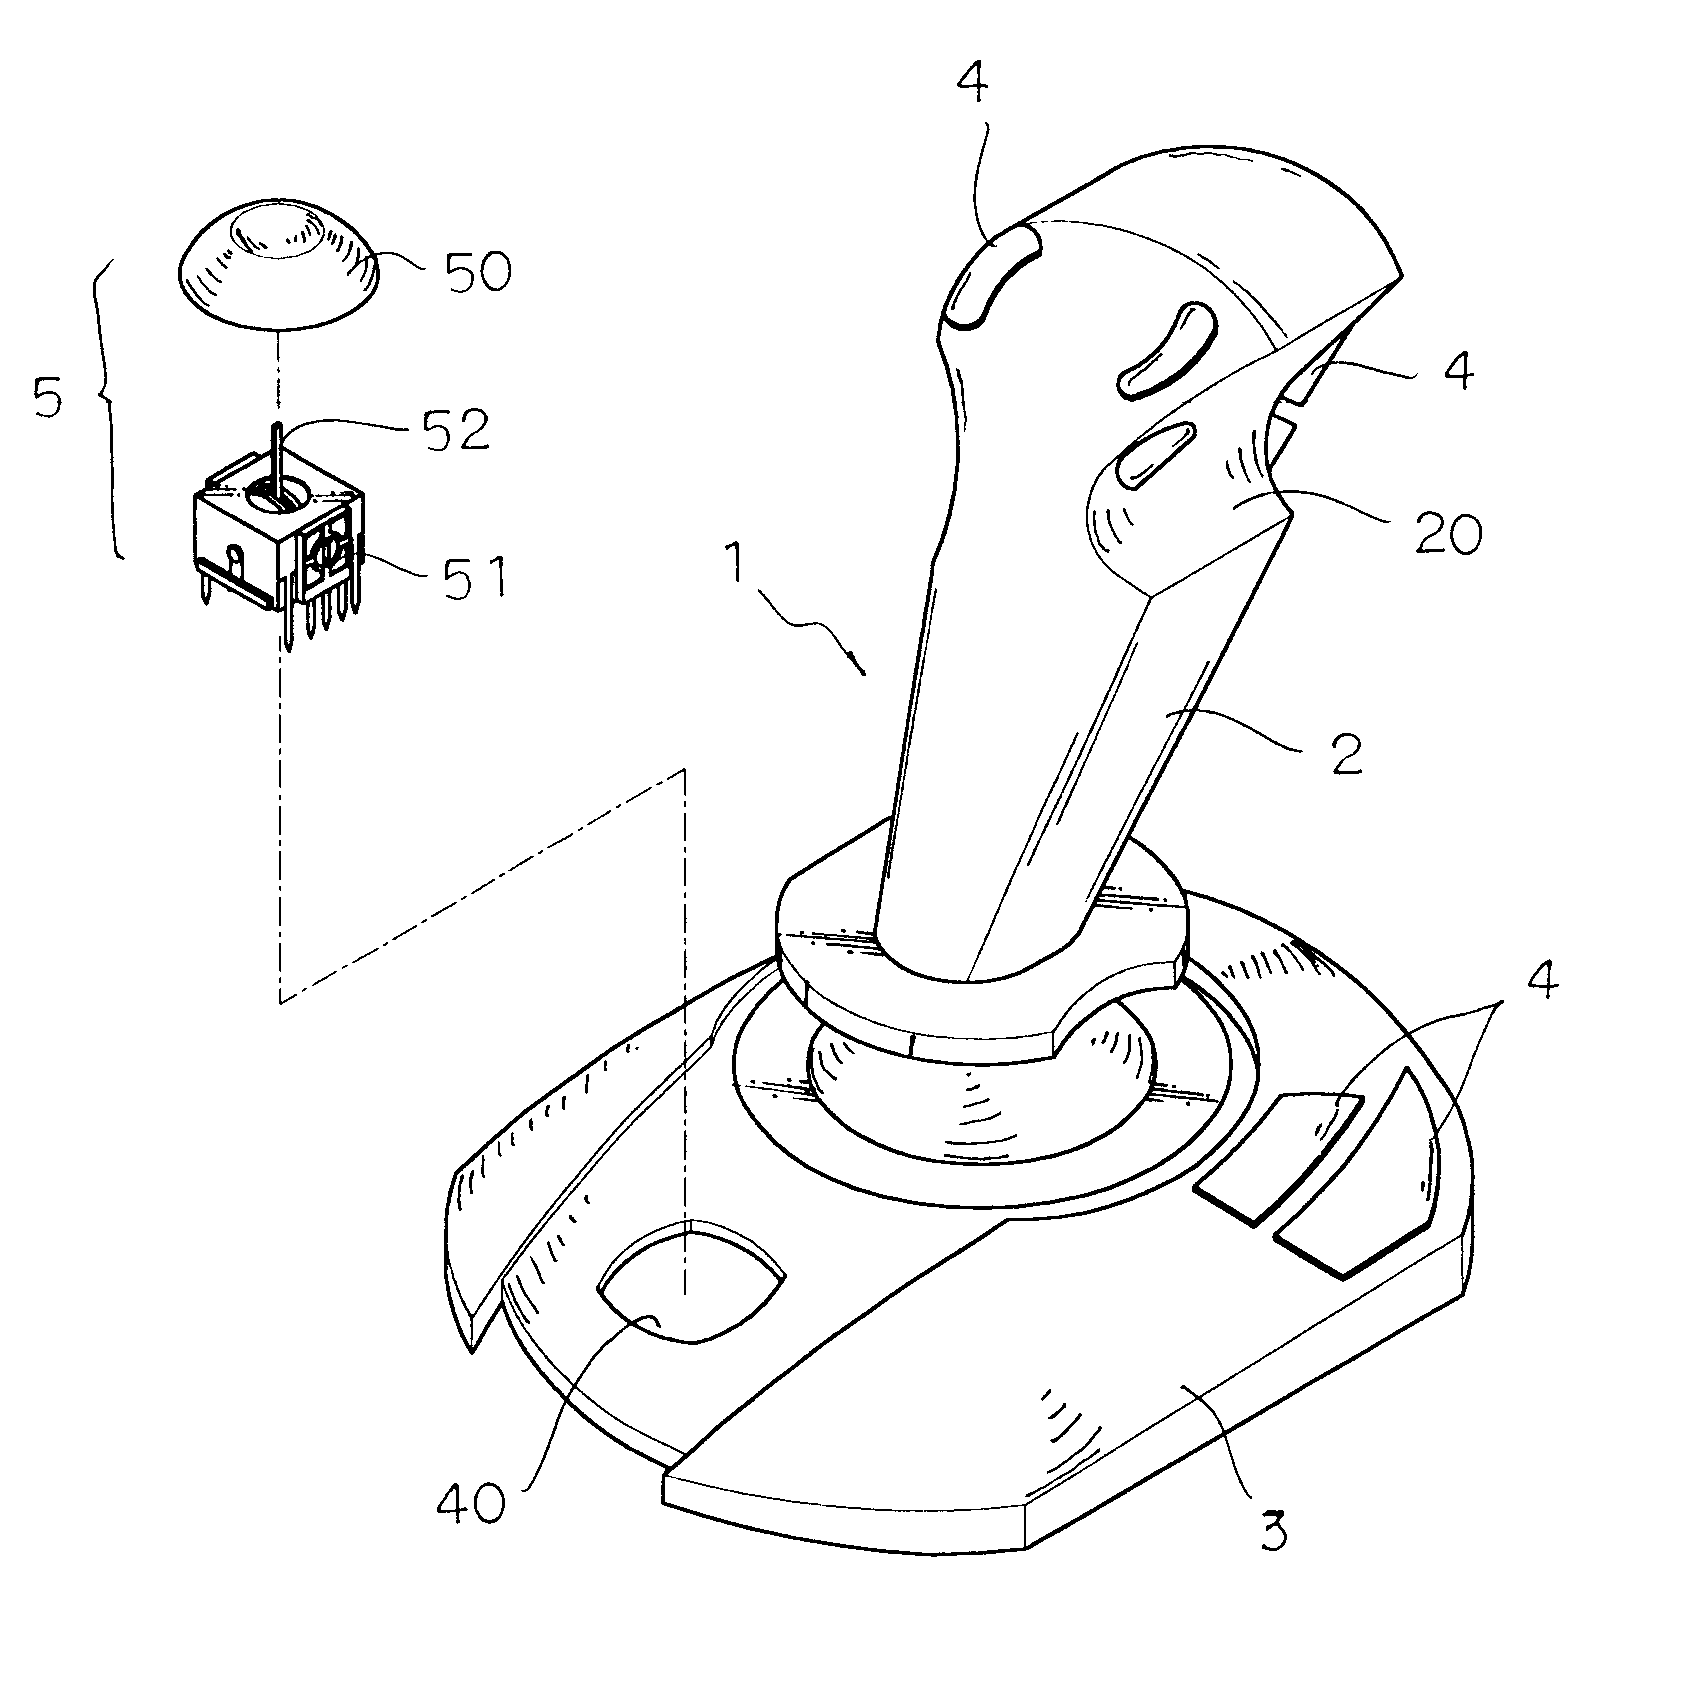 Joystick capable of controlling direction rudder and accelerator synchronously